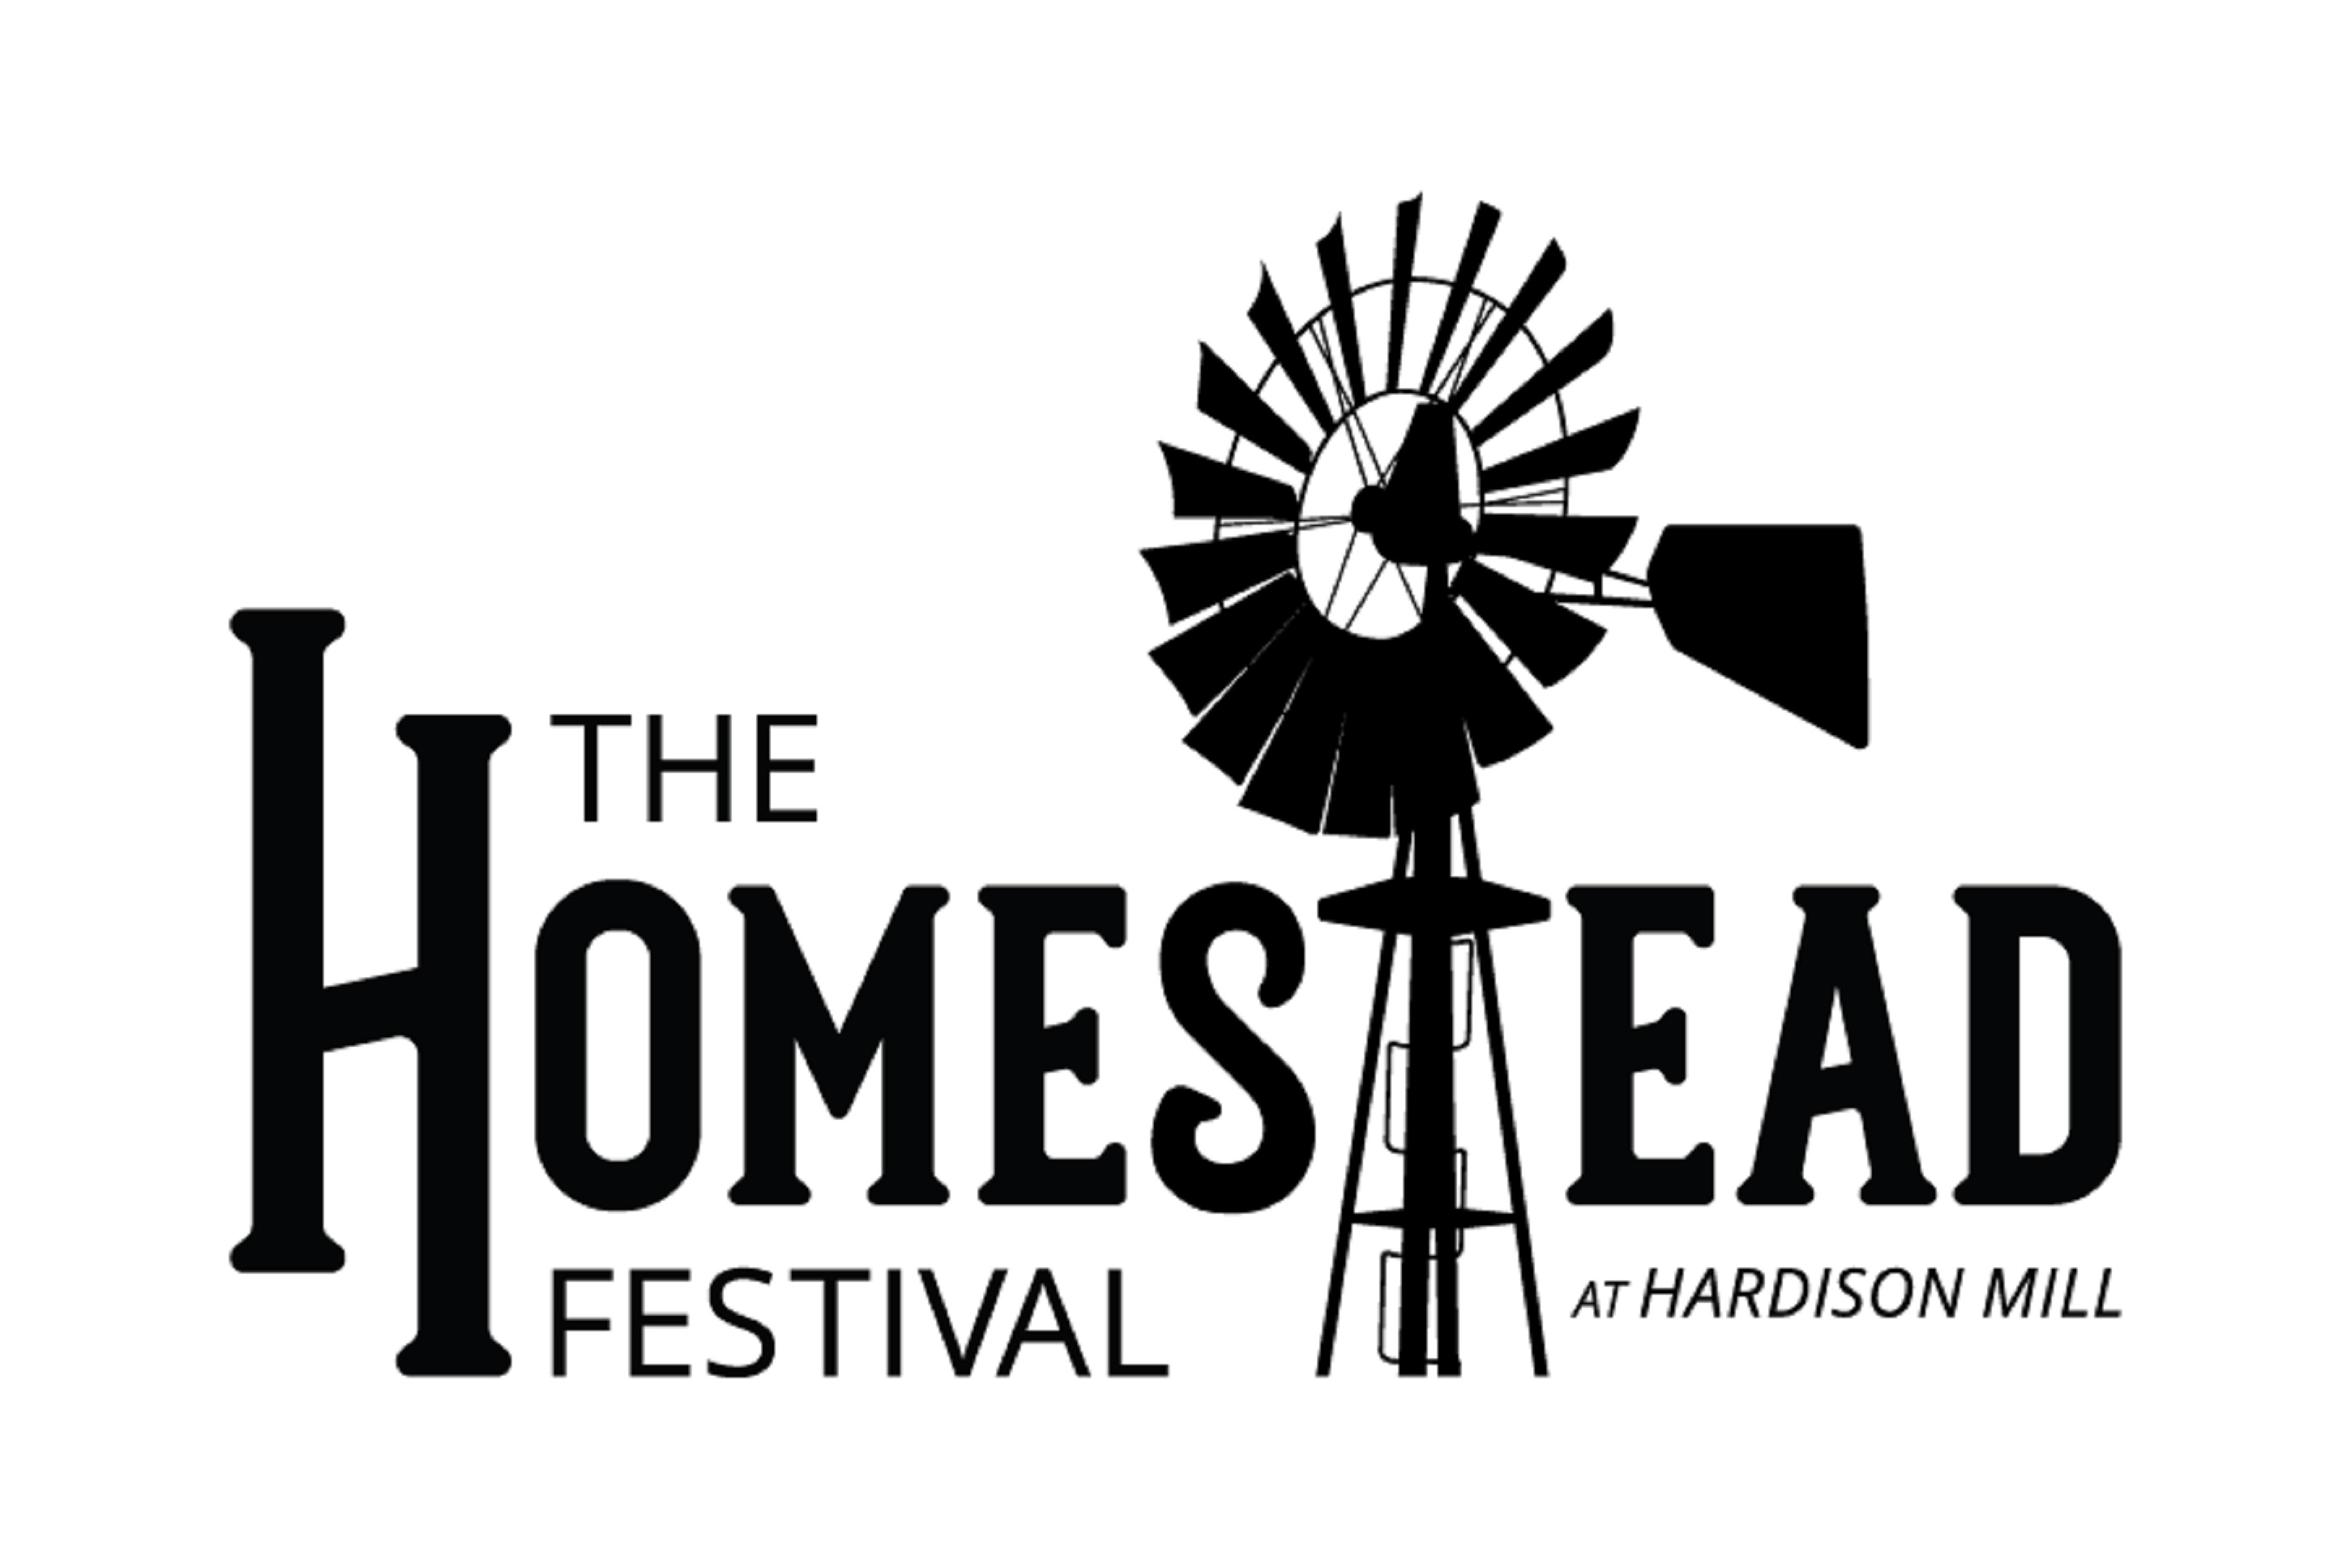 Kevin Costner & Modern West Leads the Musical Lineup for The Homestead Festival